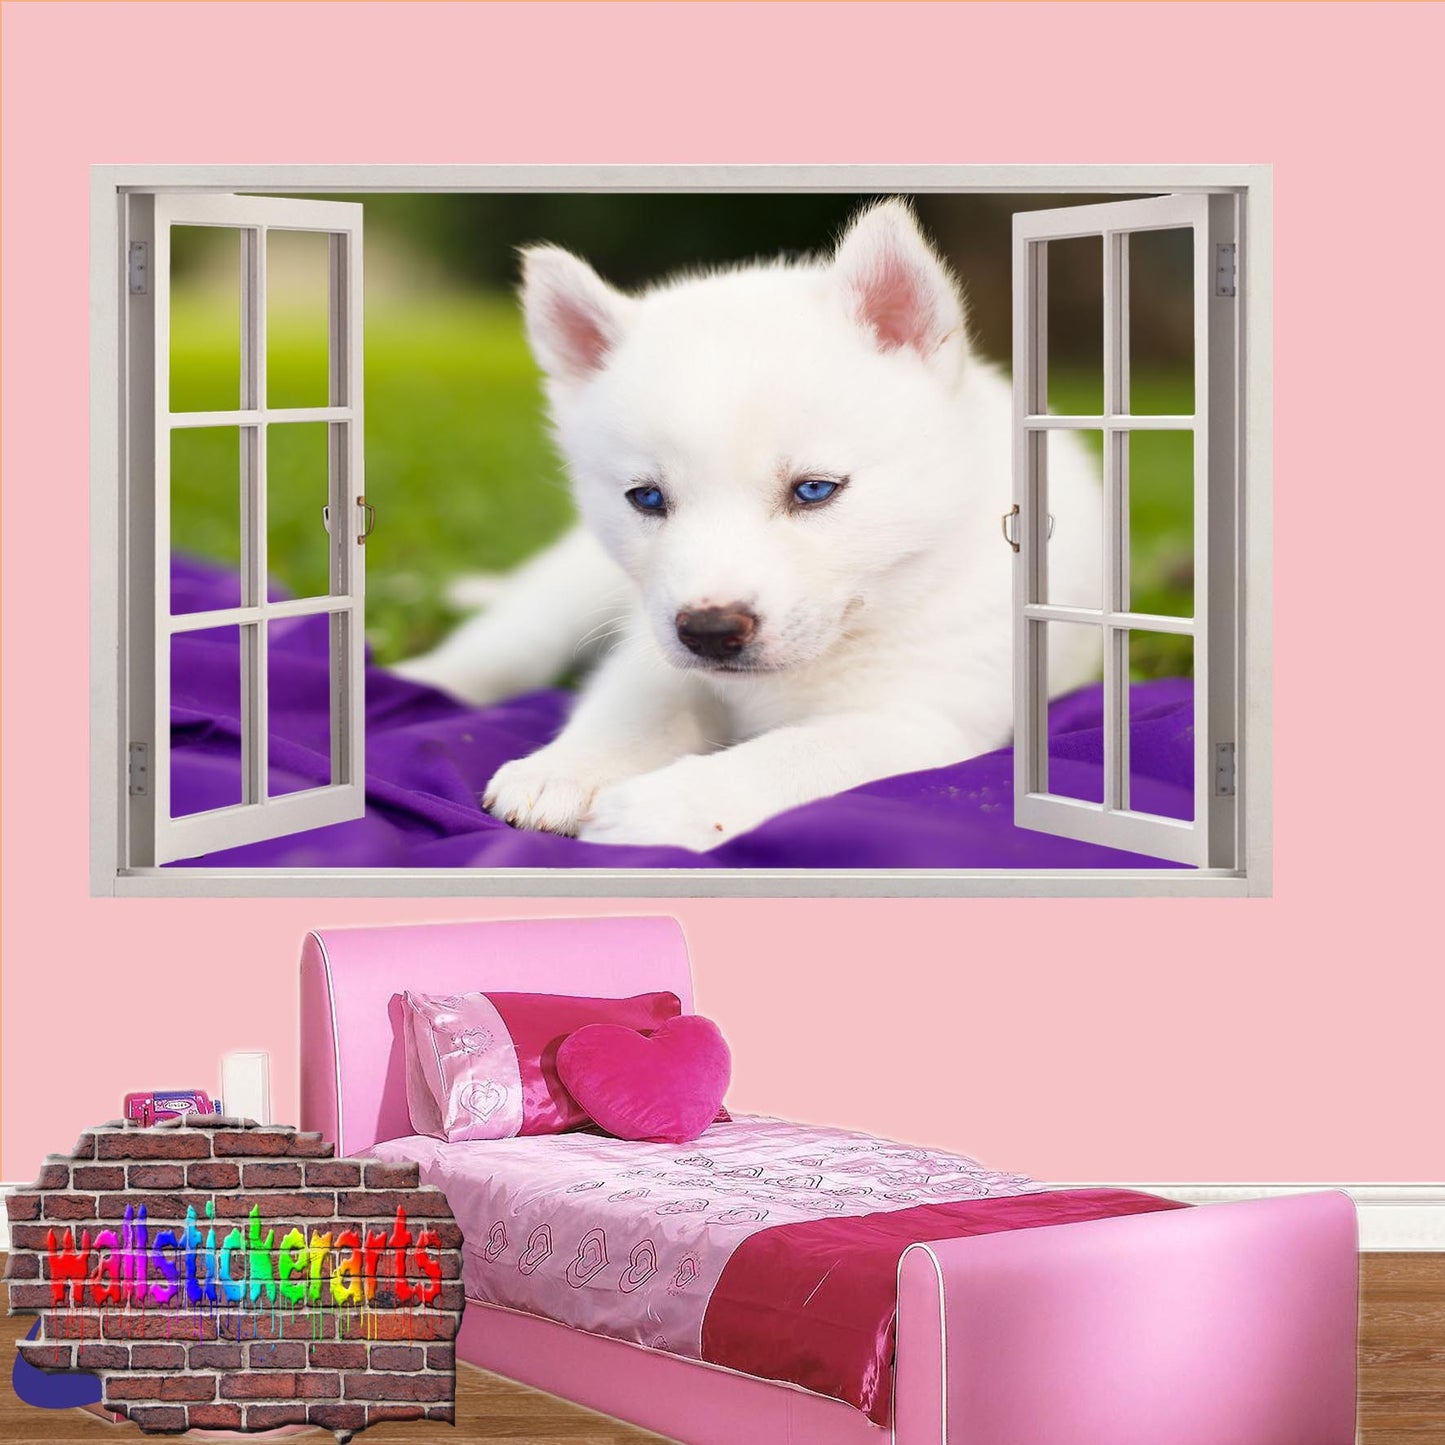 White Husky Pup 3d Art Smashed Effect Wall Sticker Room Office Nursery Shop Decor Decal Mural